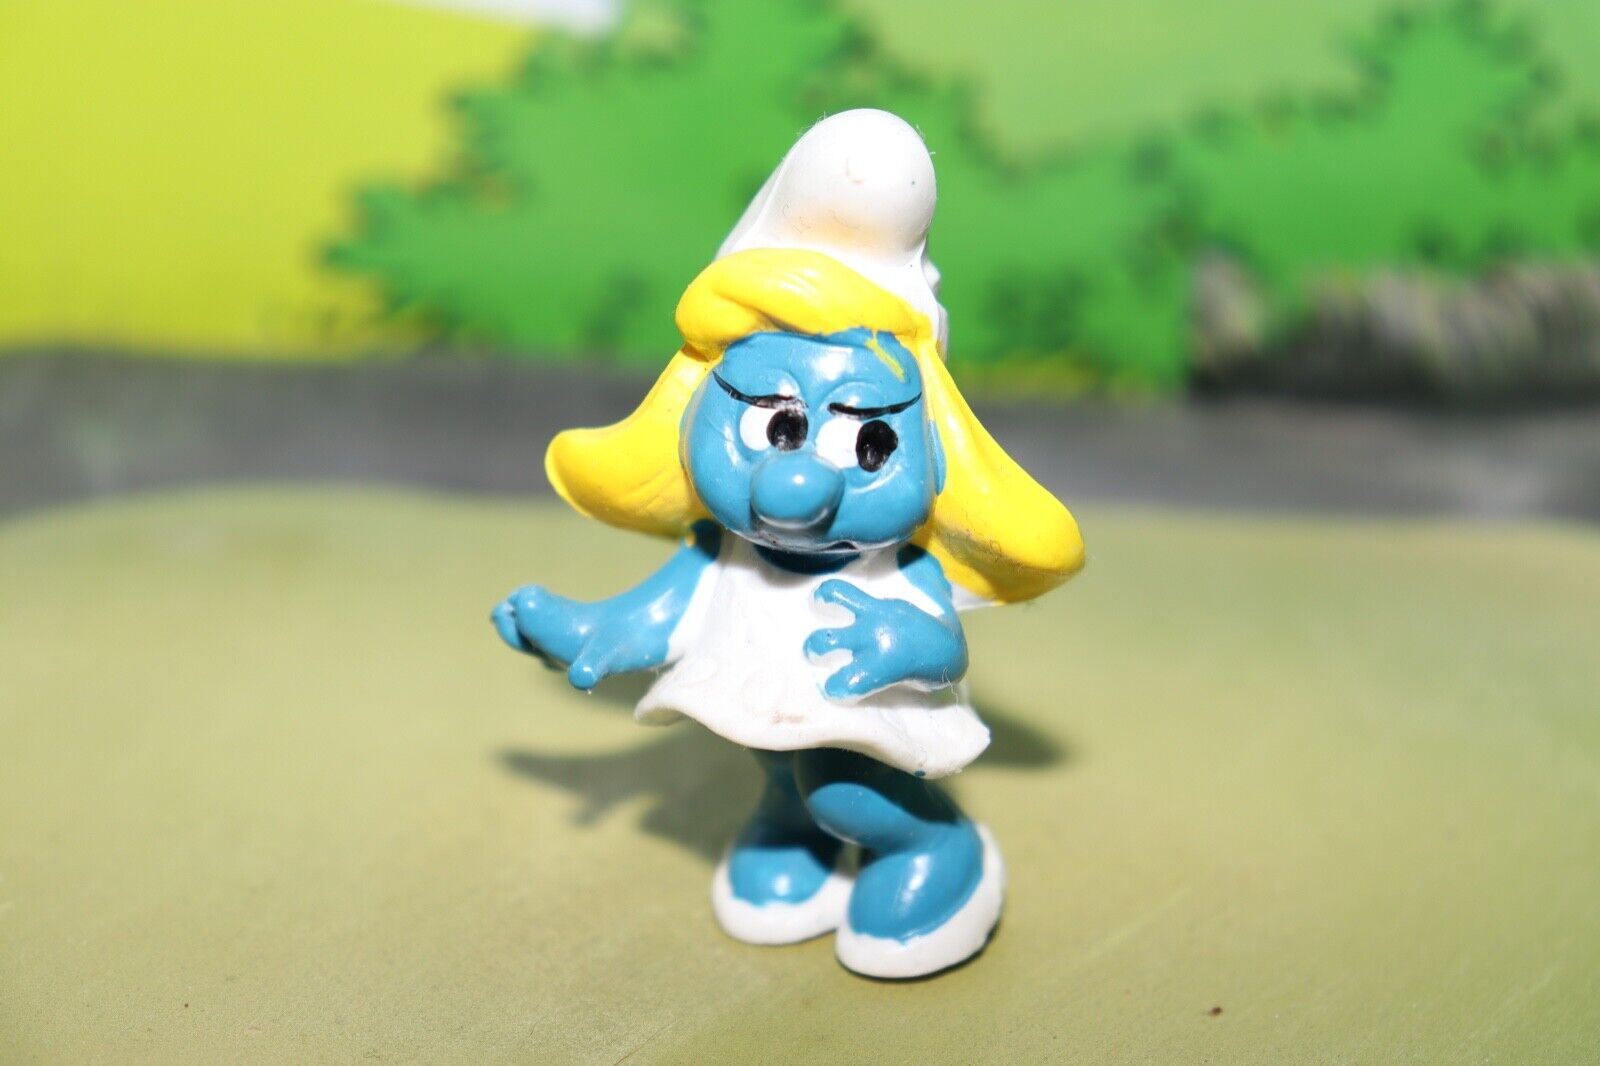 The Smurfs Classic Smurfette Smurf Normal Hand Out Pose 20034 Vintage Figurine